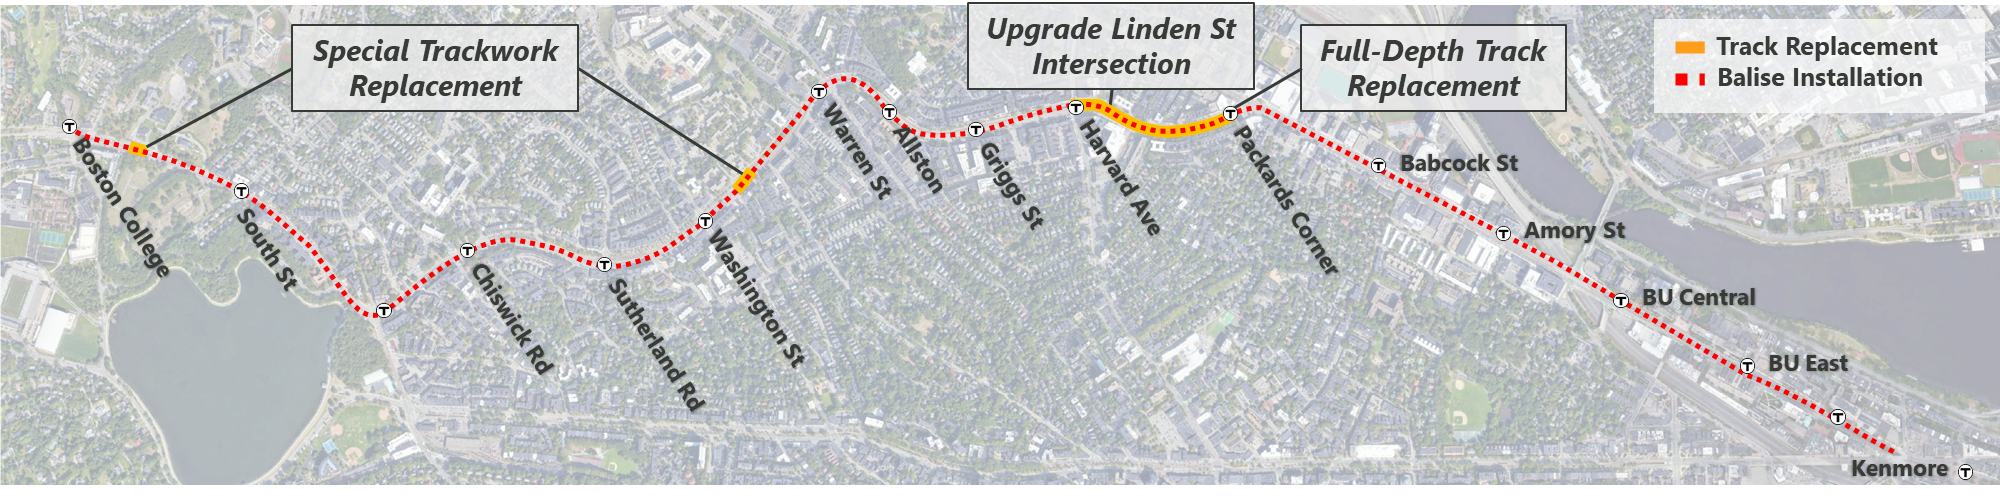 Key construction locations for the closure along the B branch include Linden Street in Allston, the Washington Street Crossover in Brighton, and the Cardinal Crossover near Boston College.